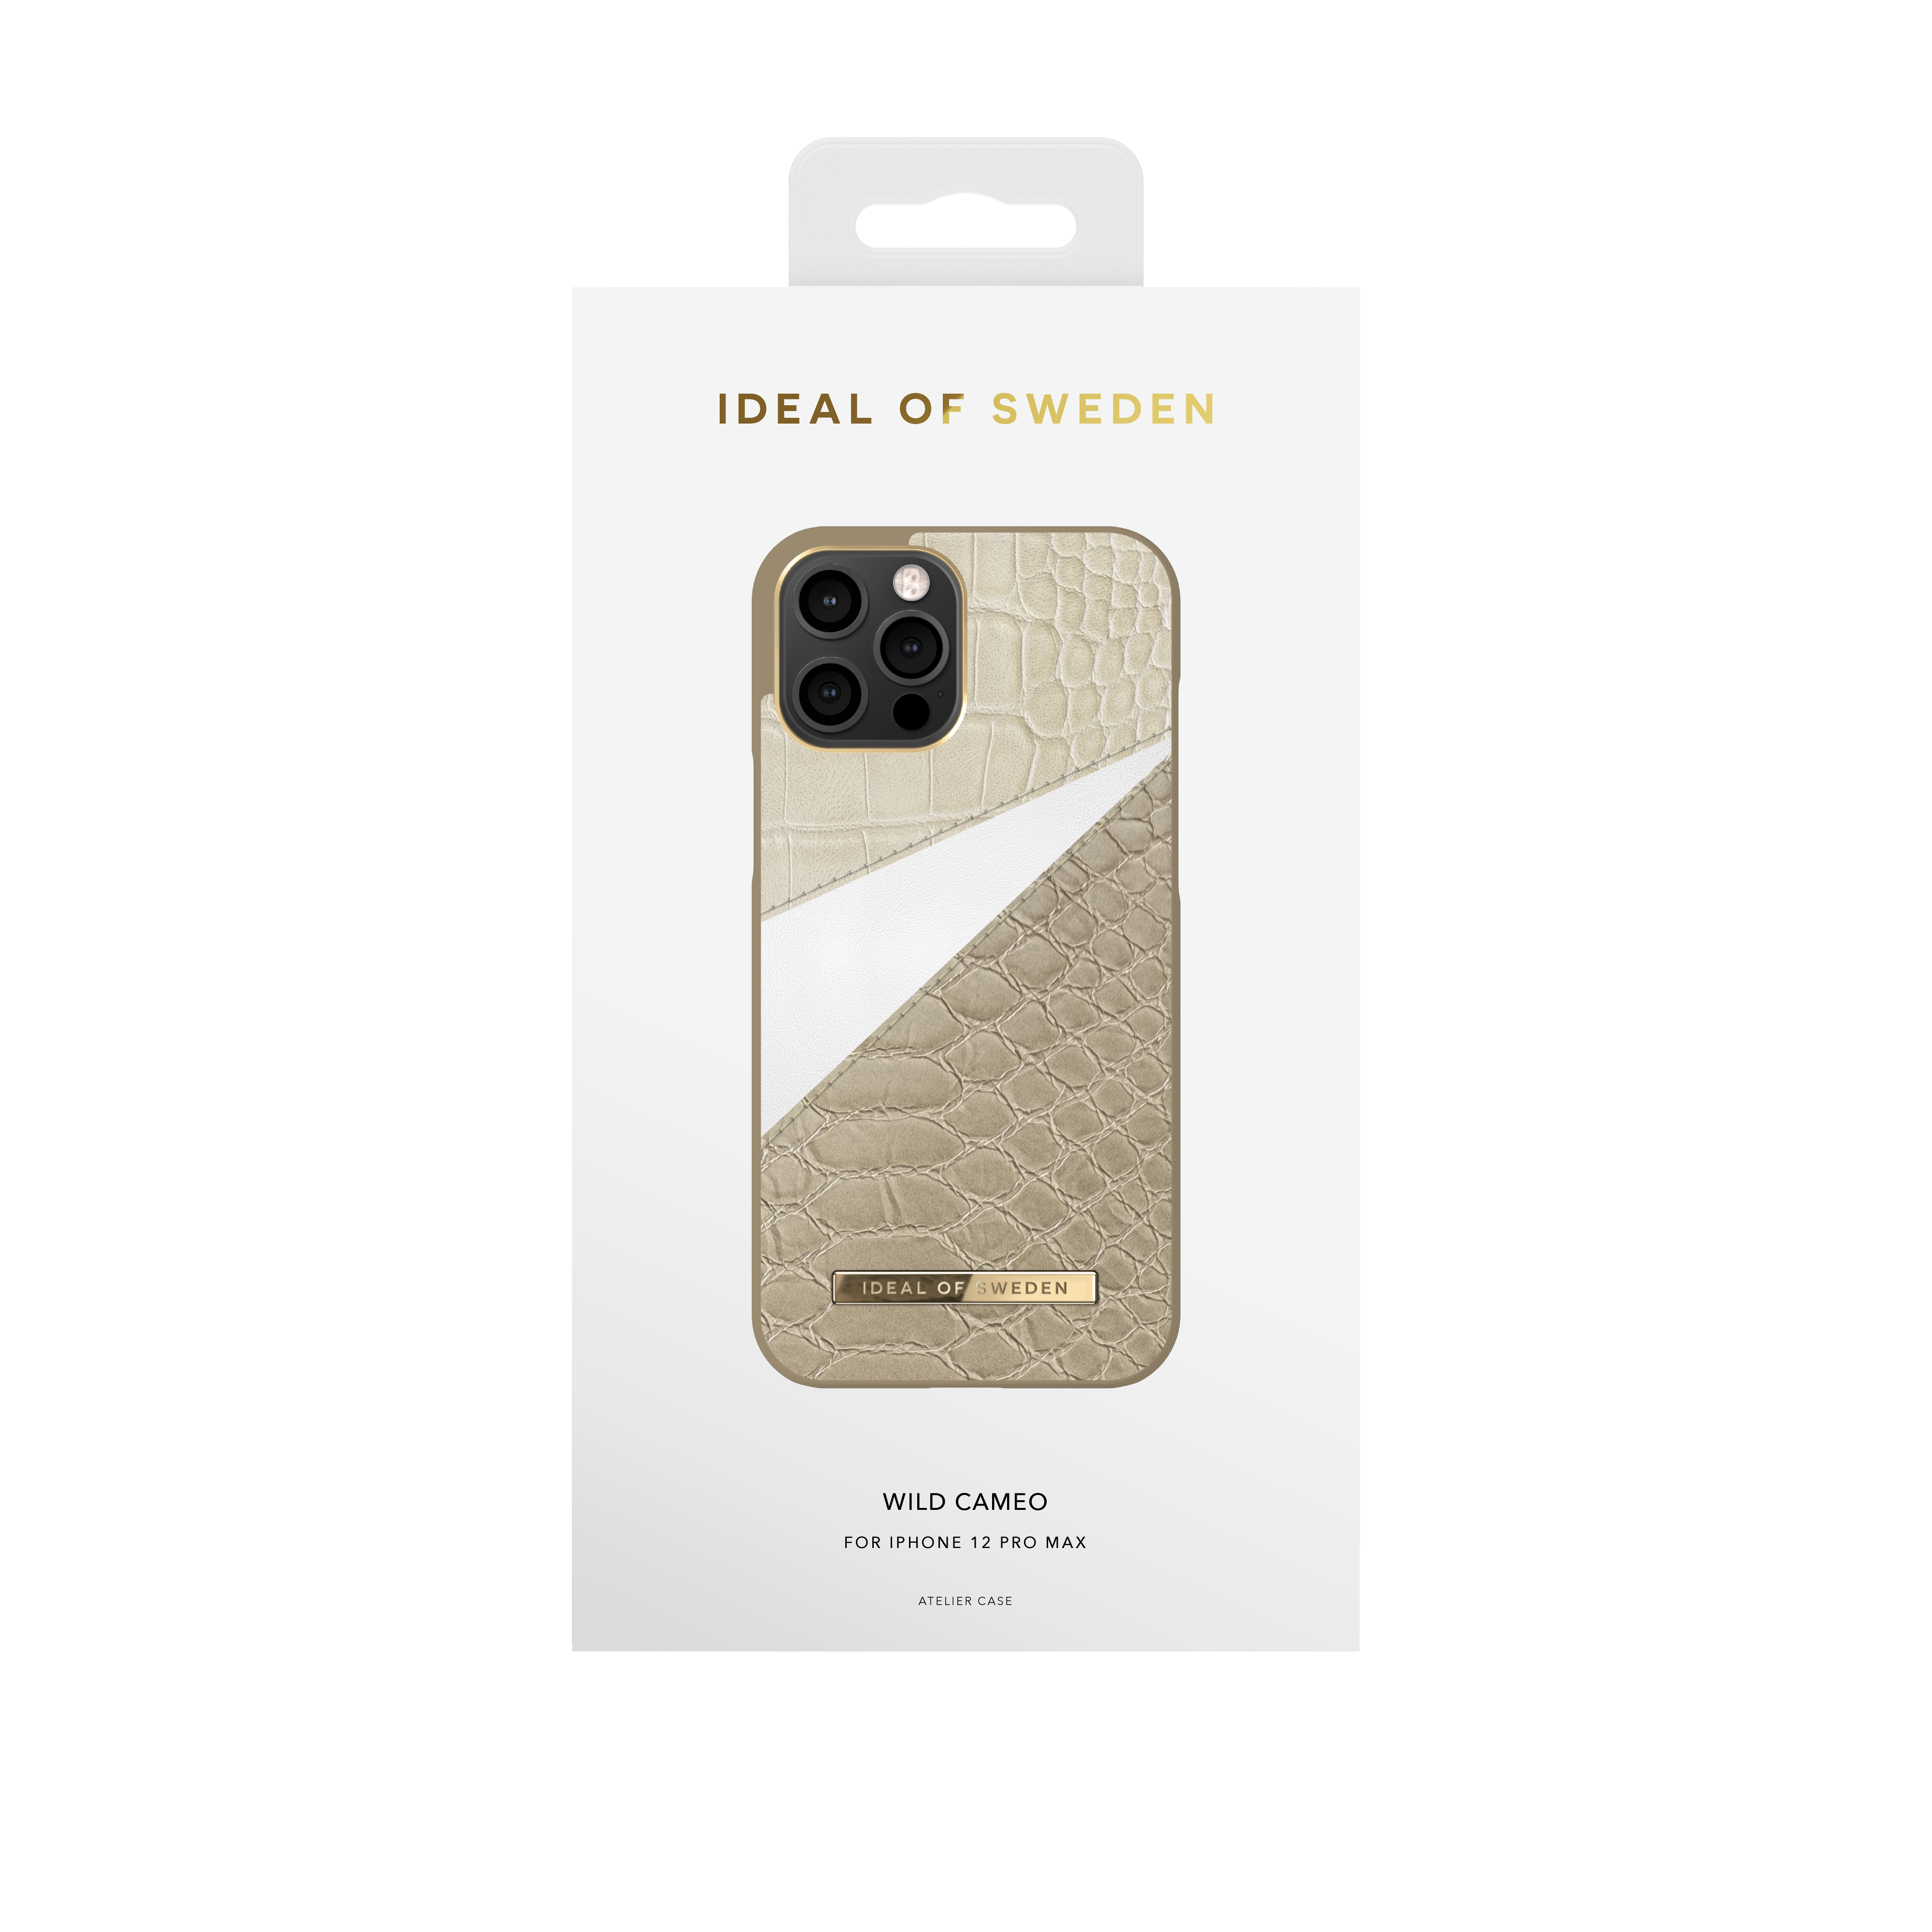 Wild 12 OF Pro IDACAW20-2067-246, Cameo Max, Apple, IPhone IDEAL SWEDEN Backcover,